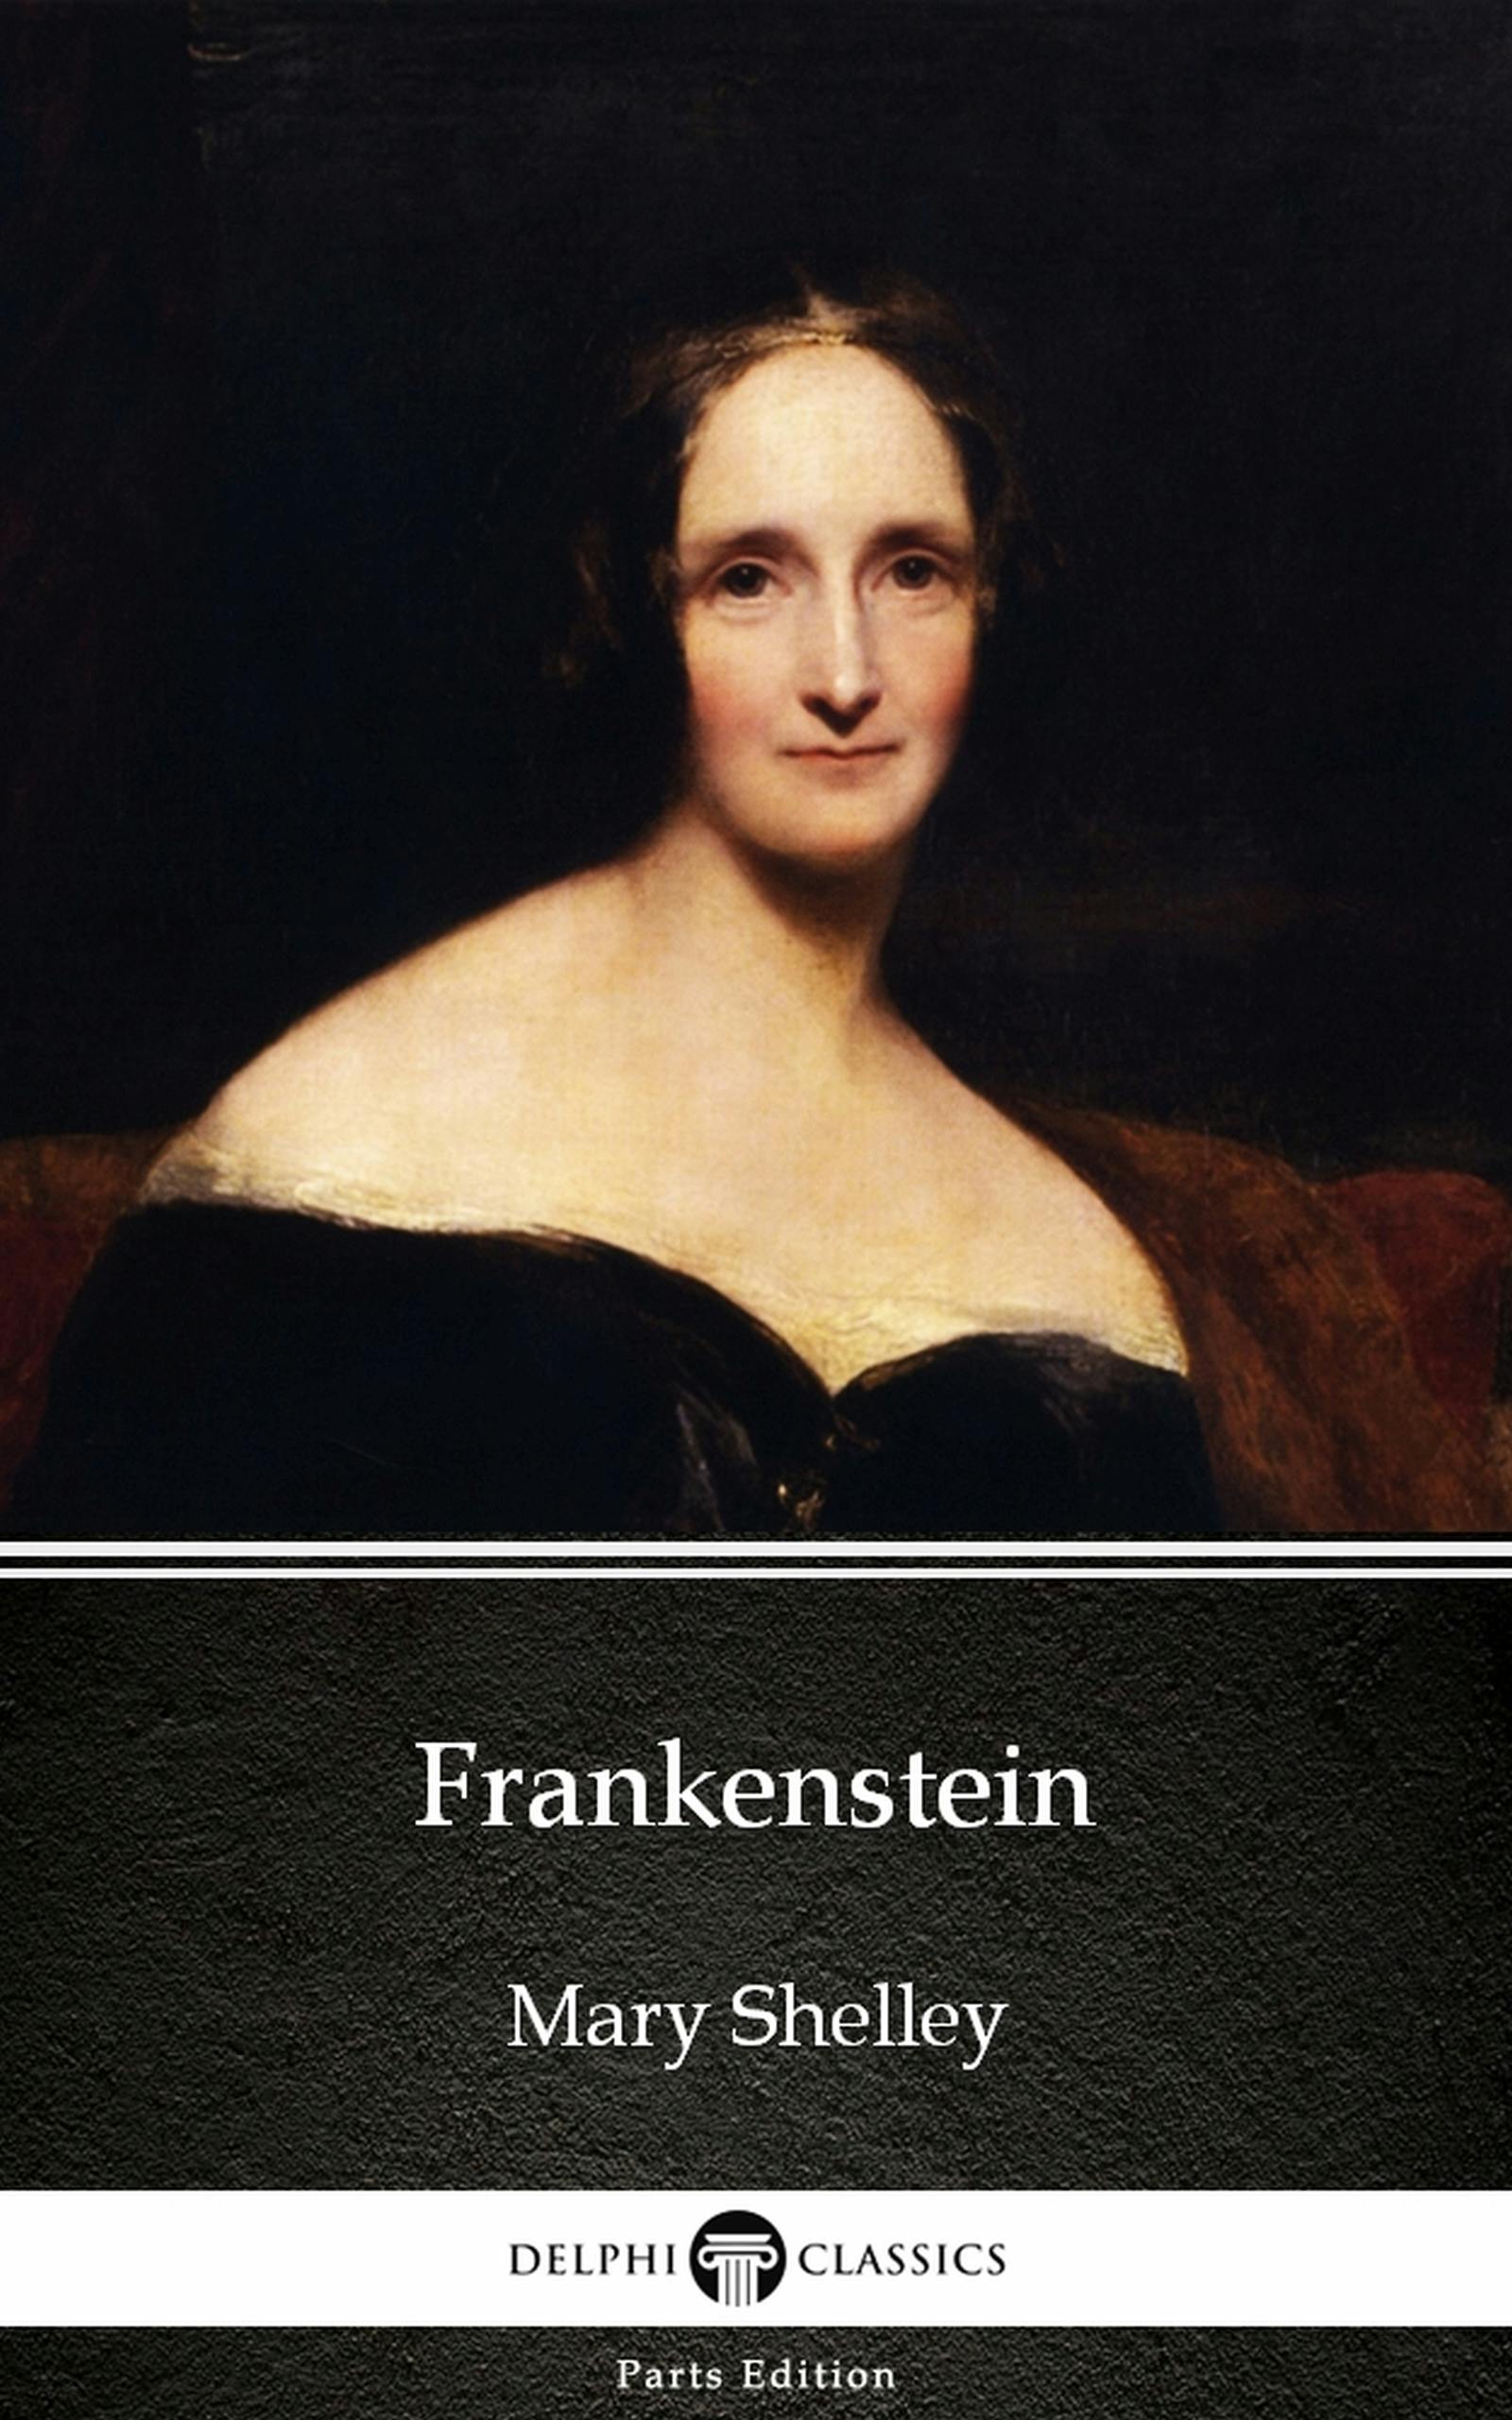 Frankenstein (1818 version) by Mary Shelley - Delphi Classics (Illustrated) - Mary Shelley